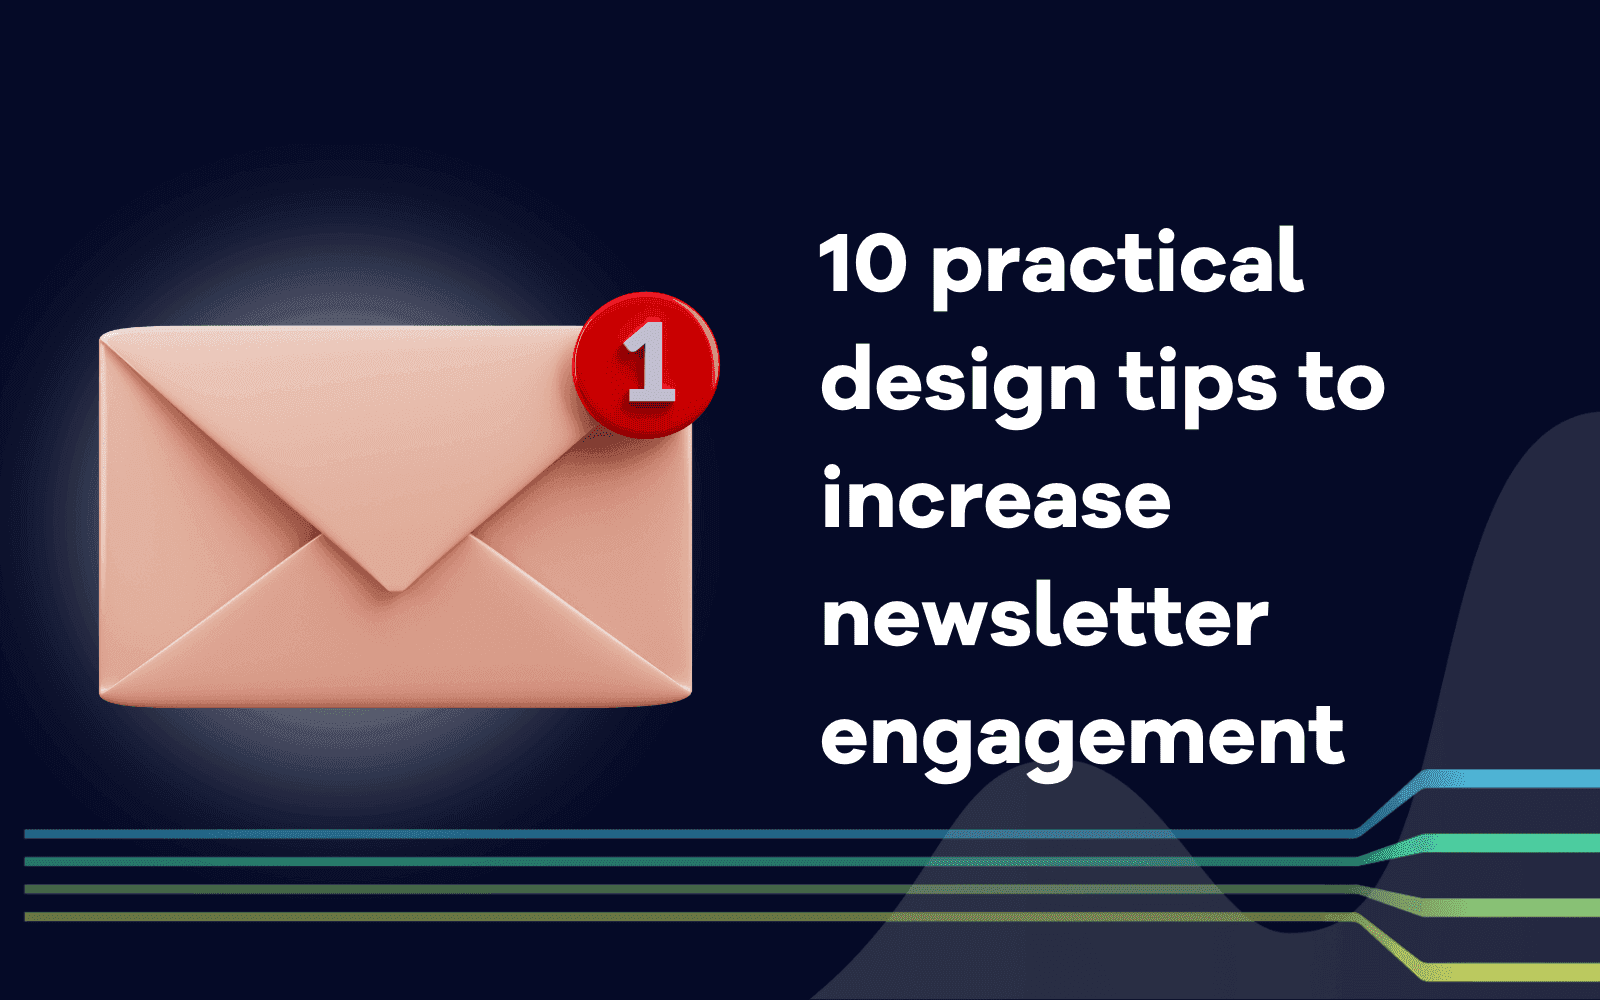 Design tips to increase newsletter engagement